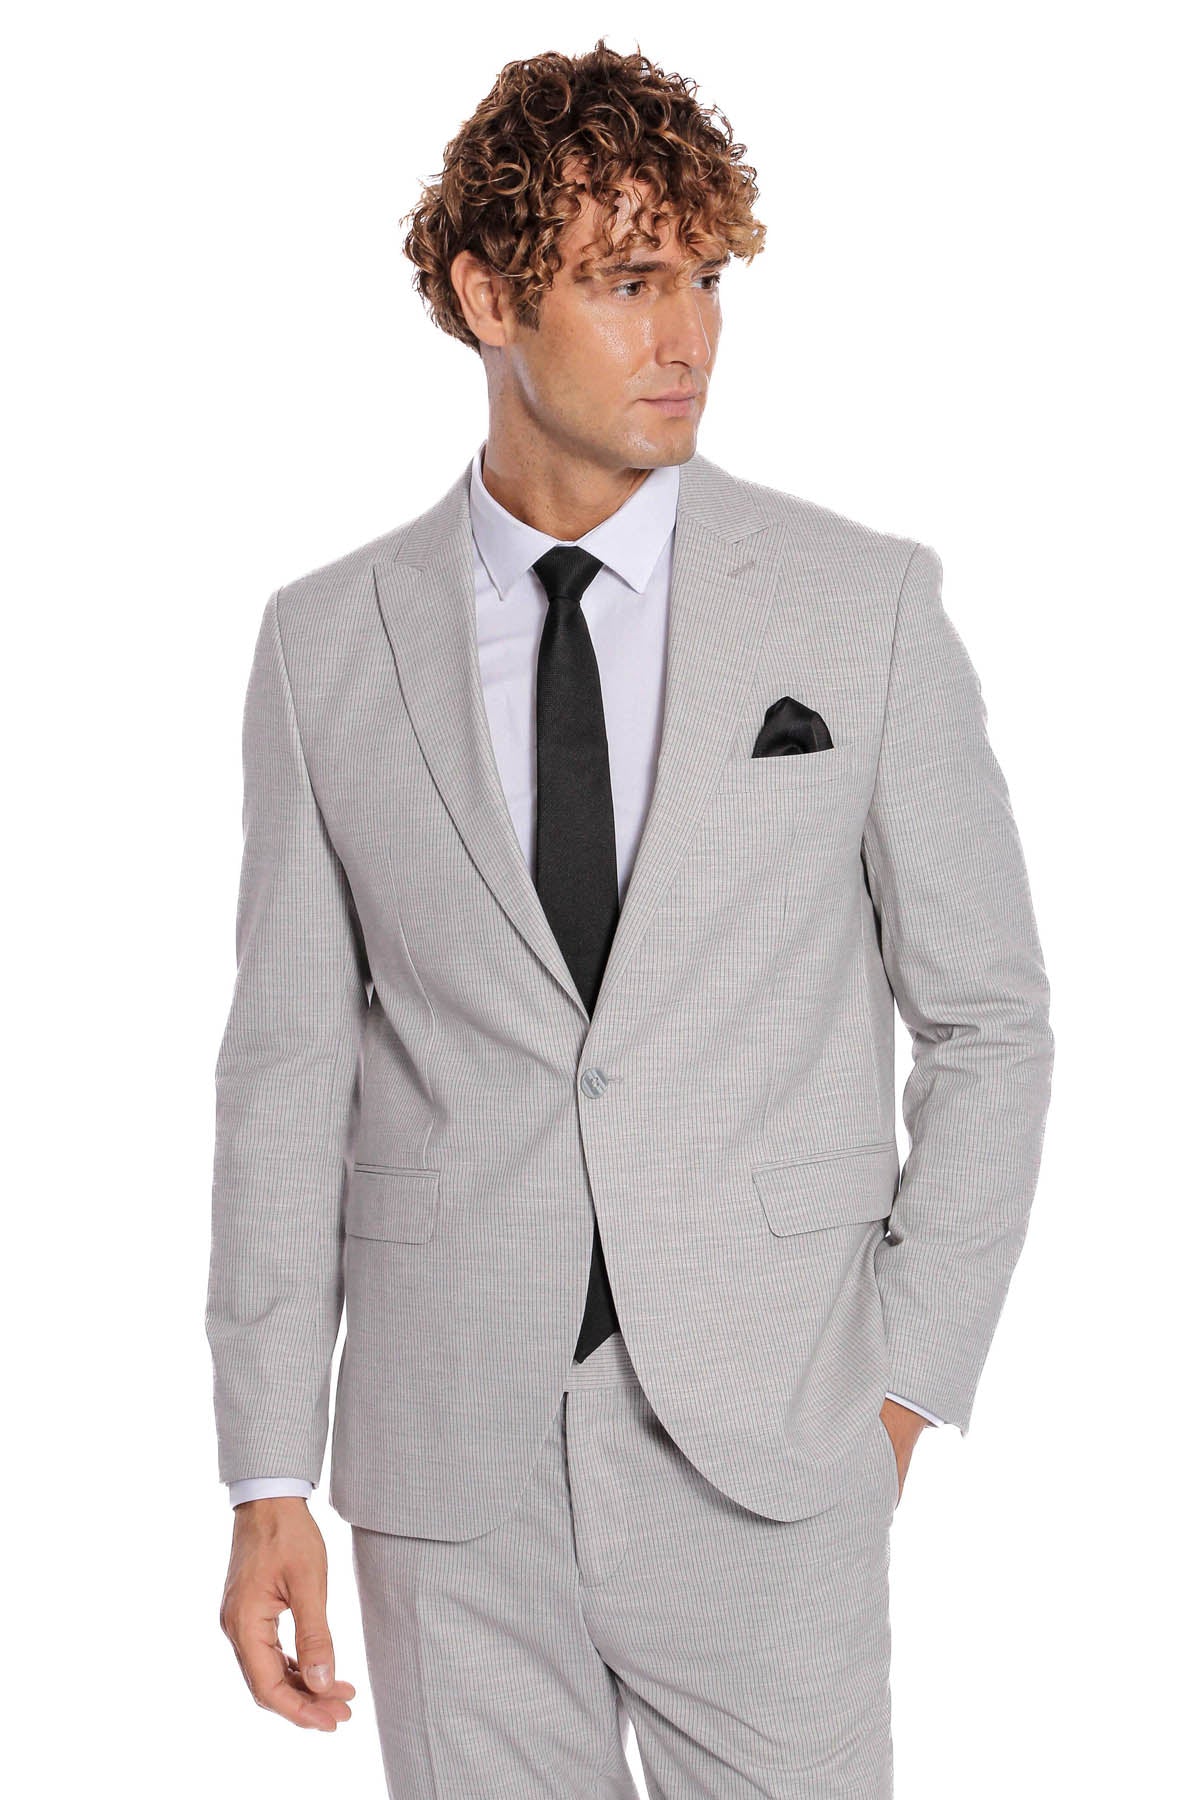 I-Deal Solid Heather Grey Suit | Zanetti Suits for Men